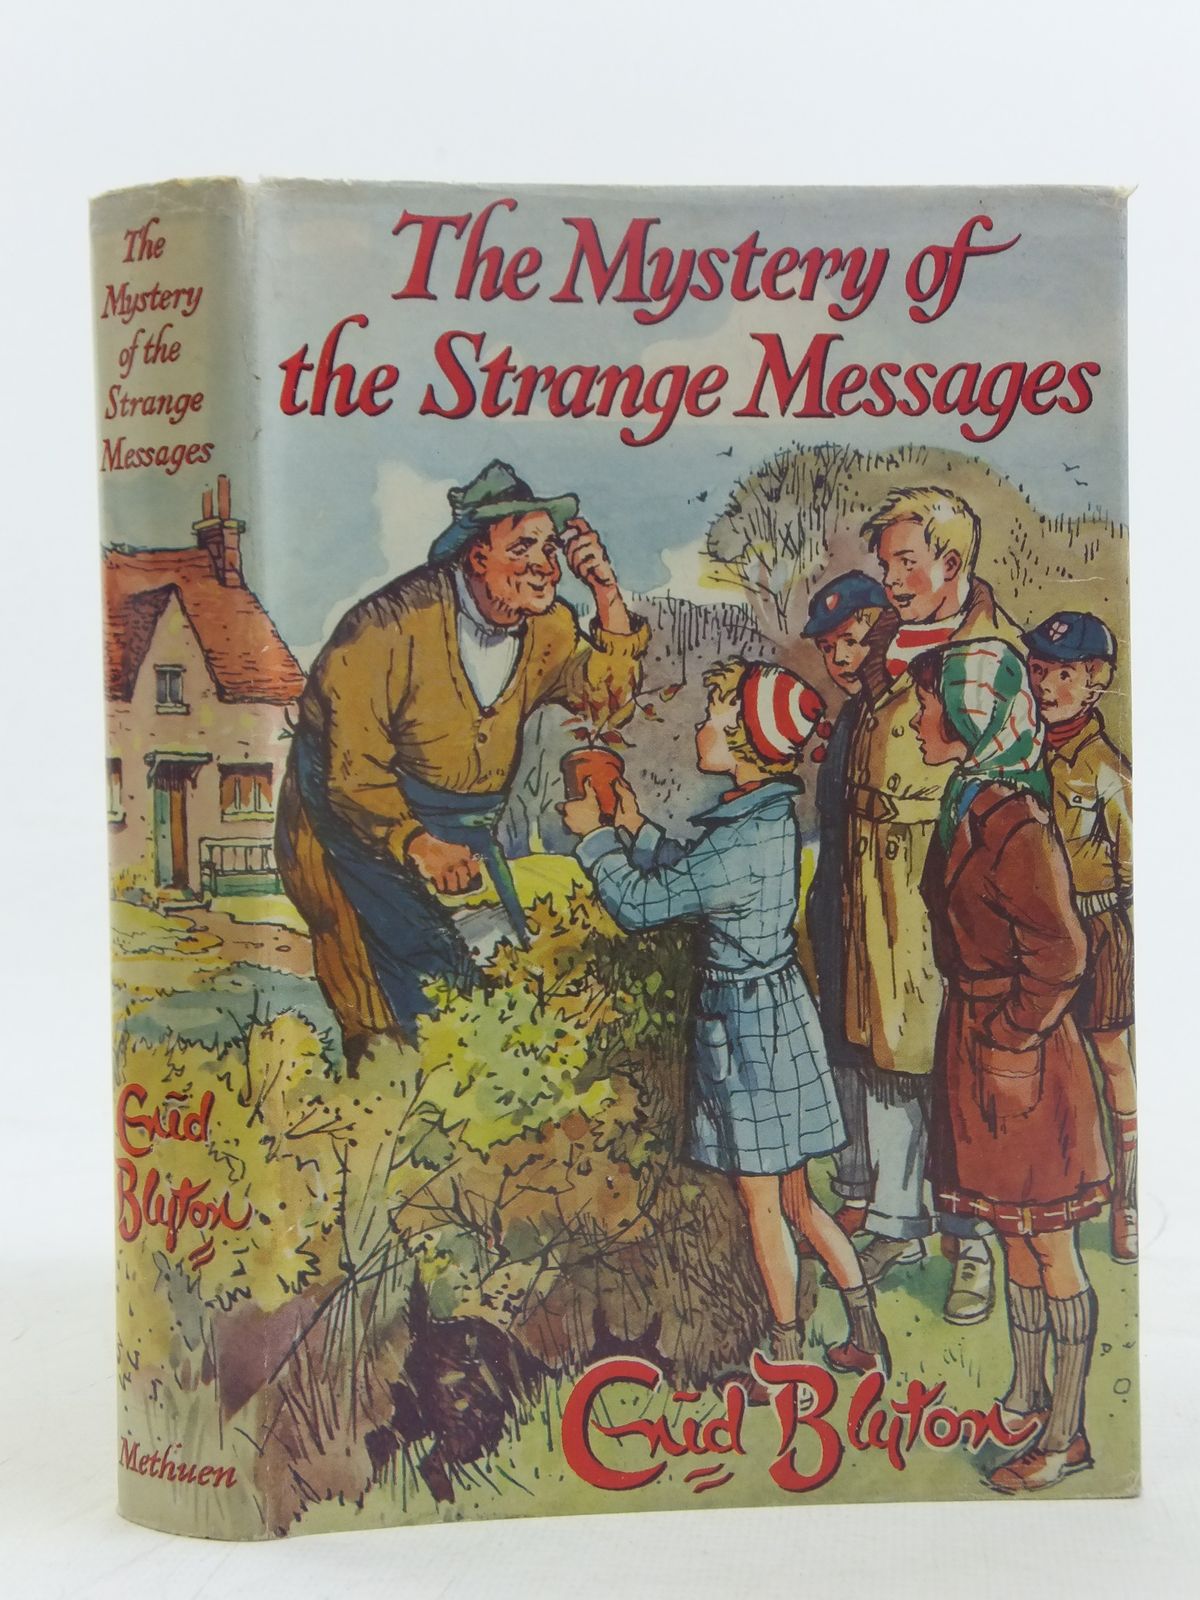 Cover of THE MYSTERY OF THE STRANGE MESSAGES by Enid Blyton